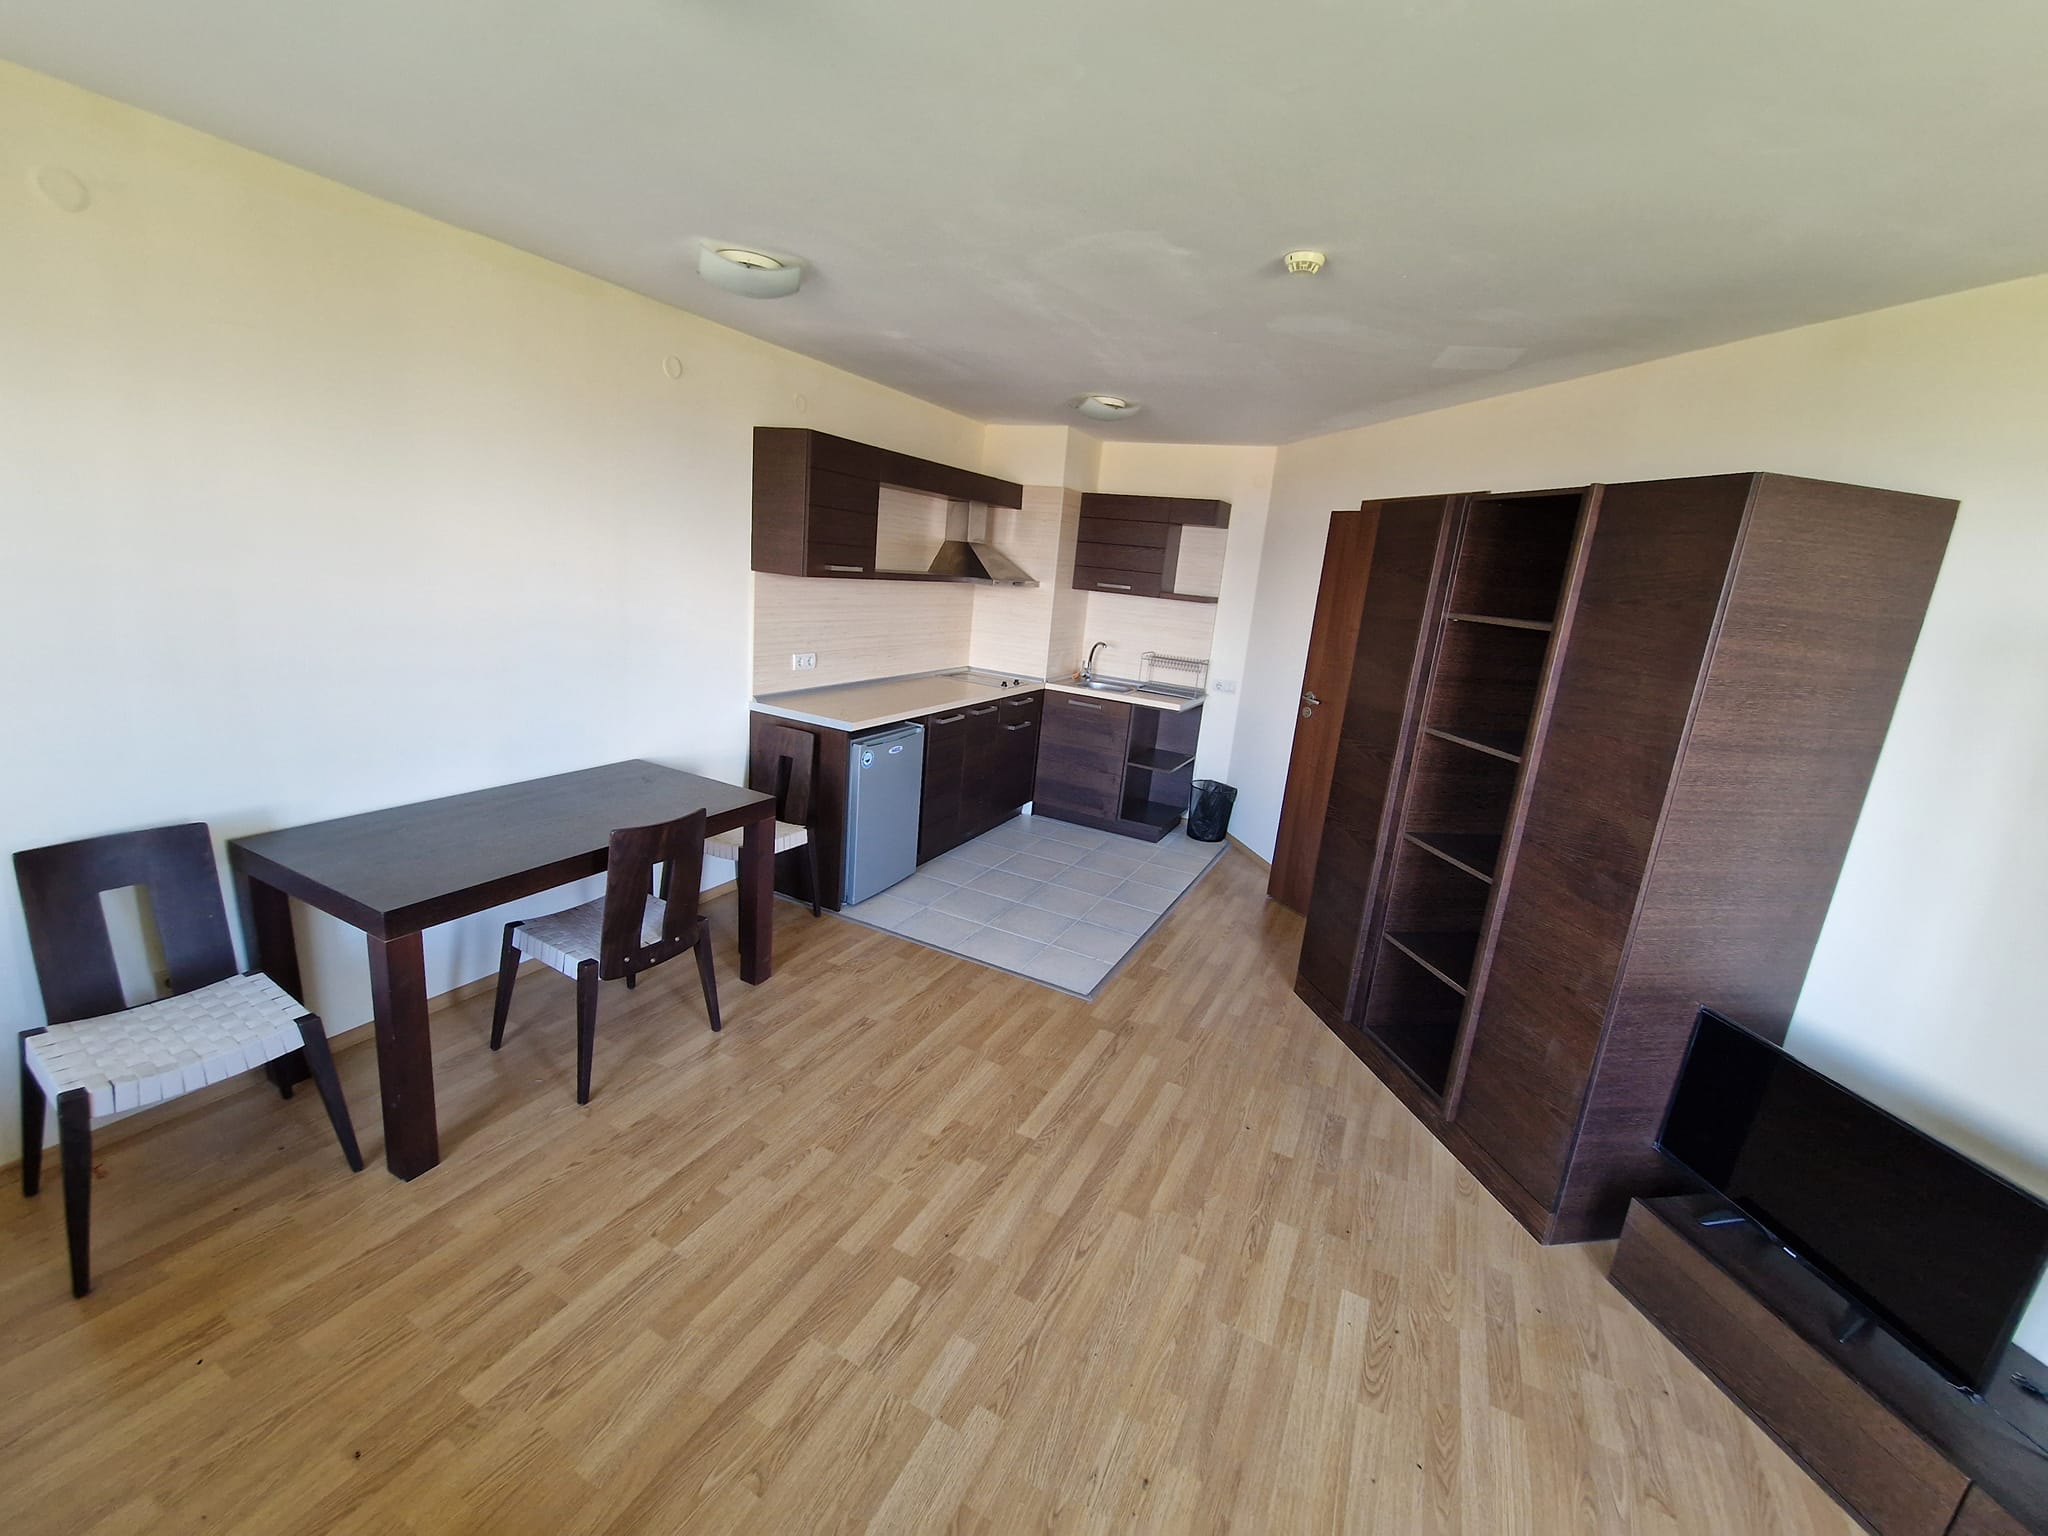 Bansko: Two bedroom apartment for sale with a panoramic view